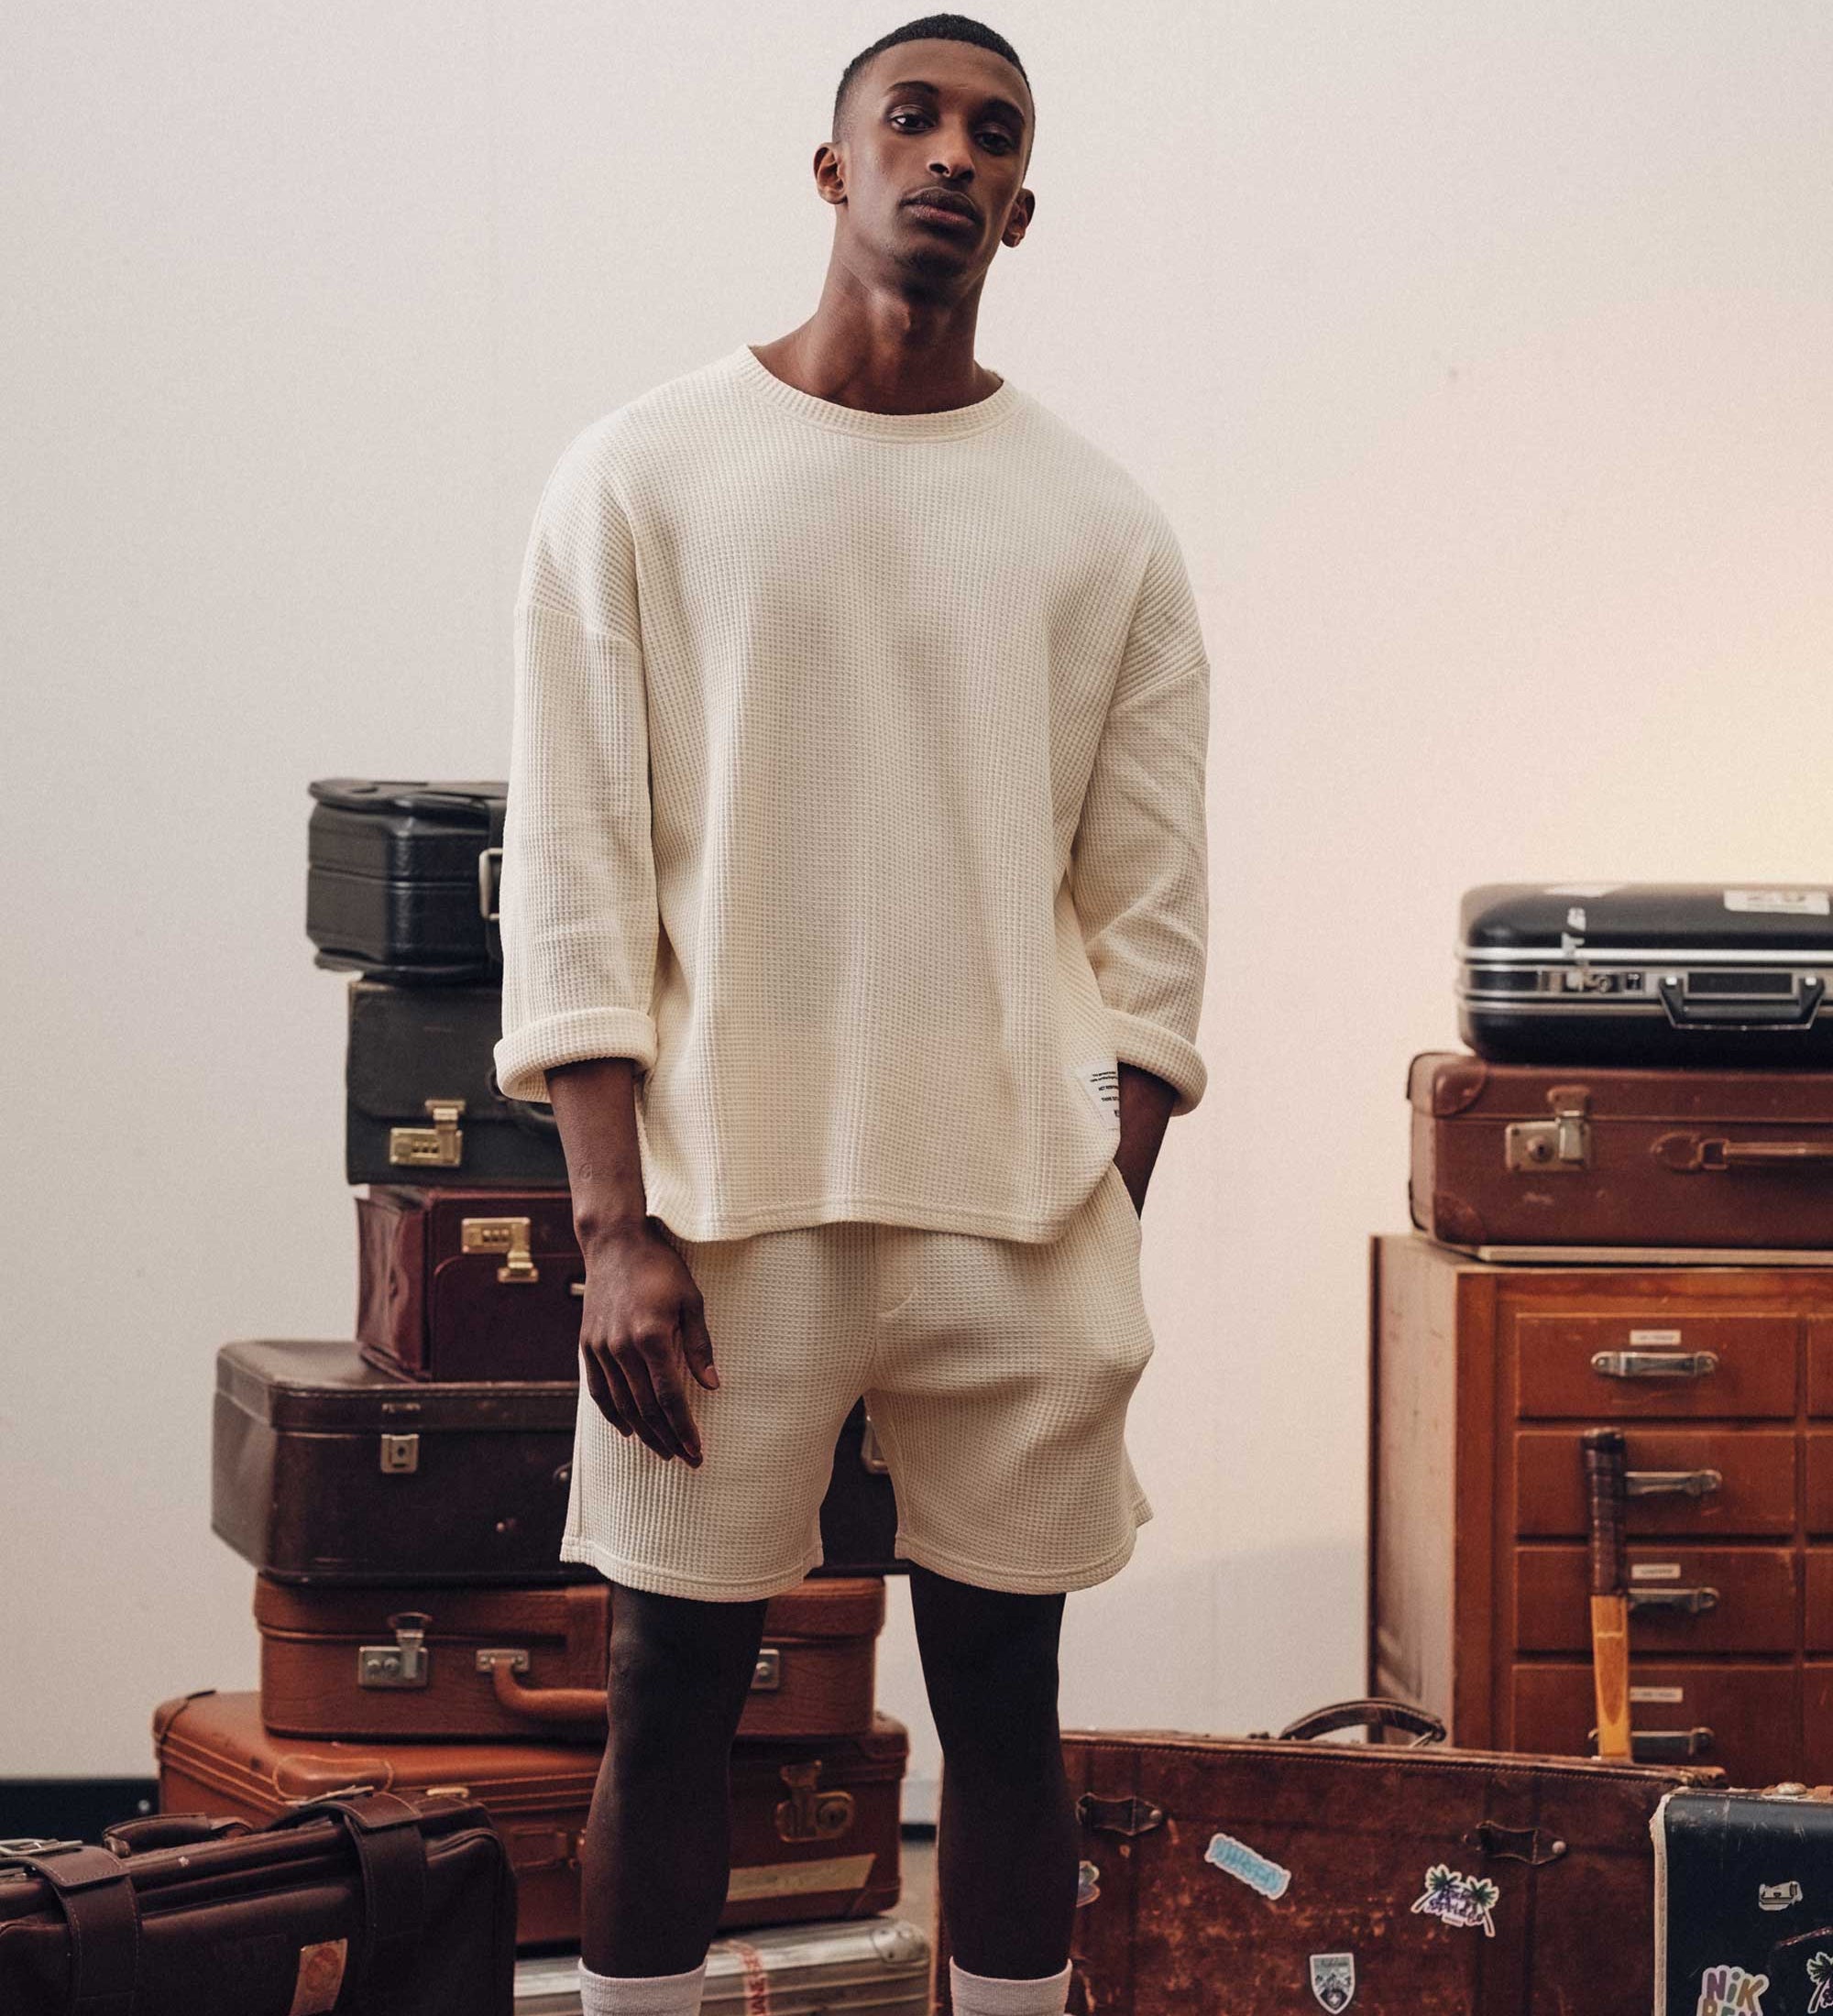 Male model wearing an off-white waffle-patterned sweatshirt with a stitched-on material label.